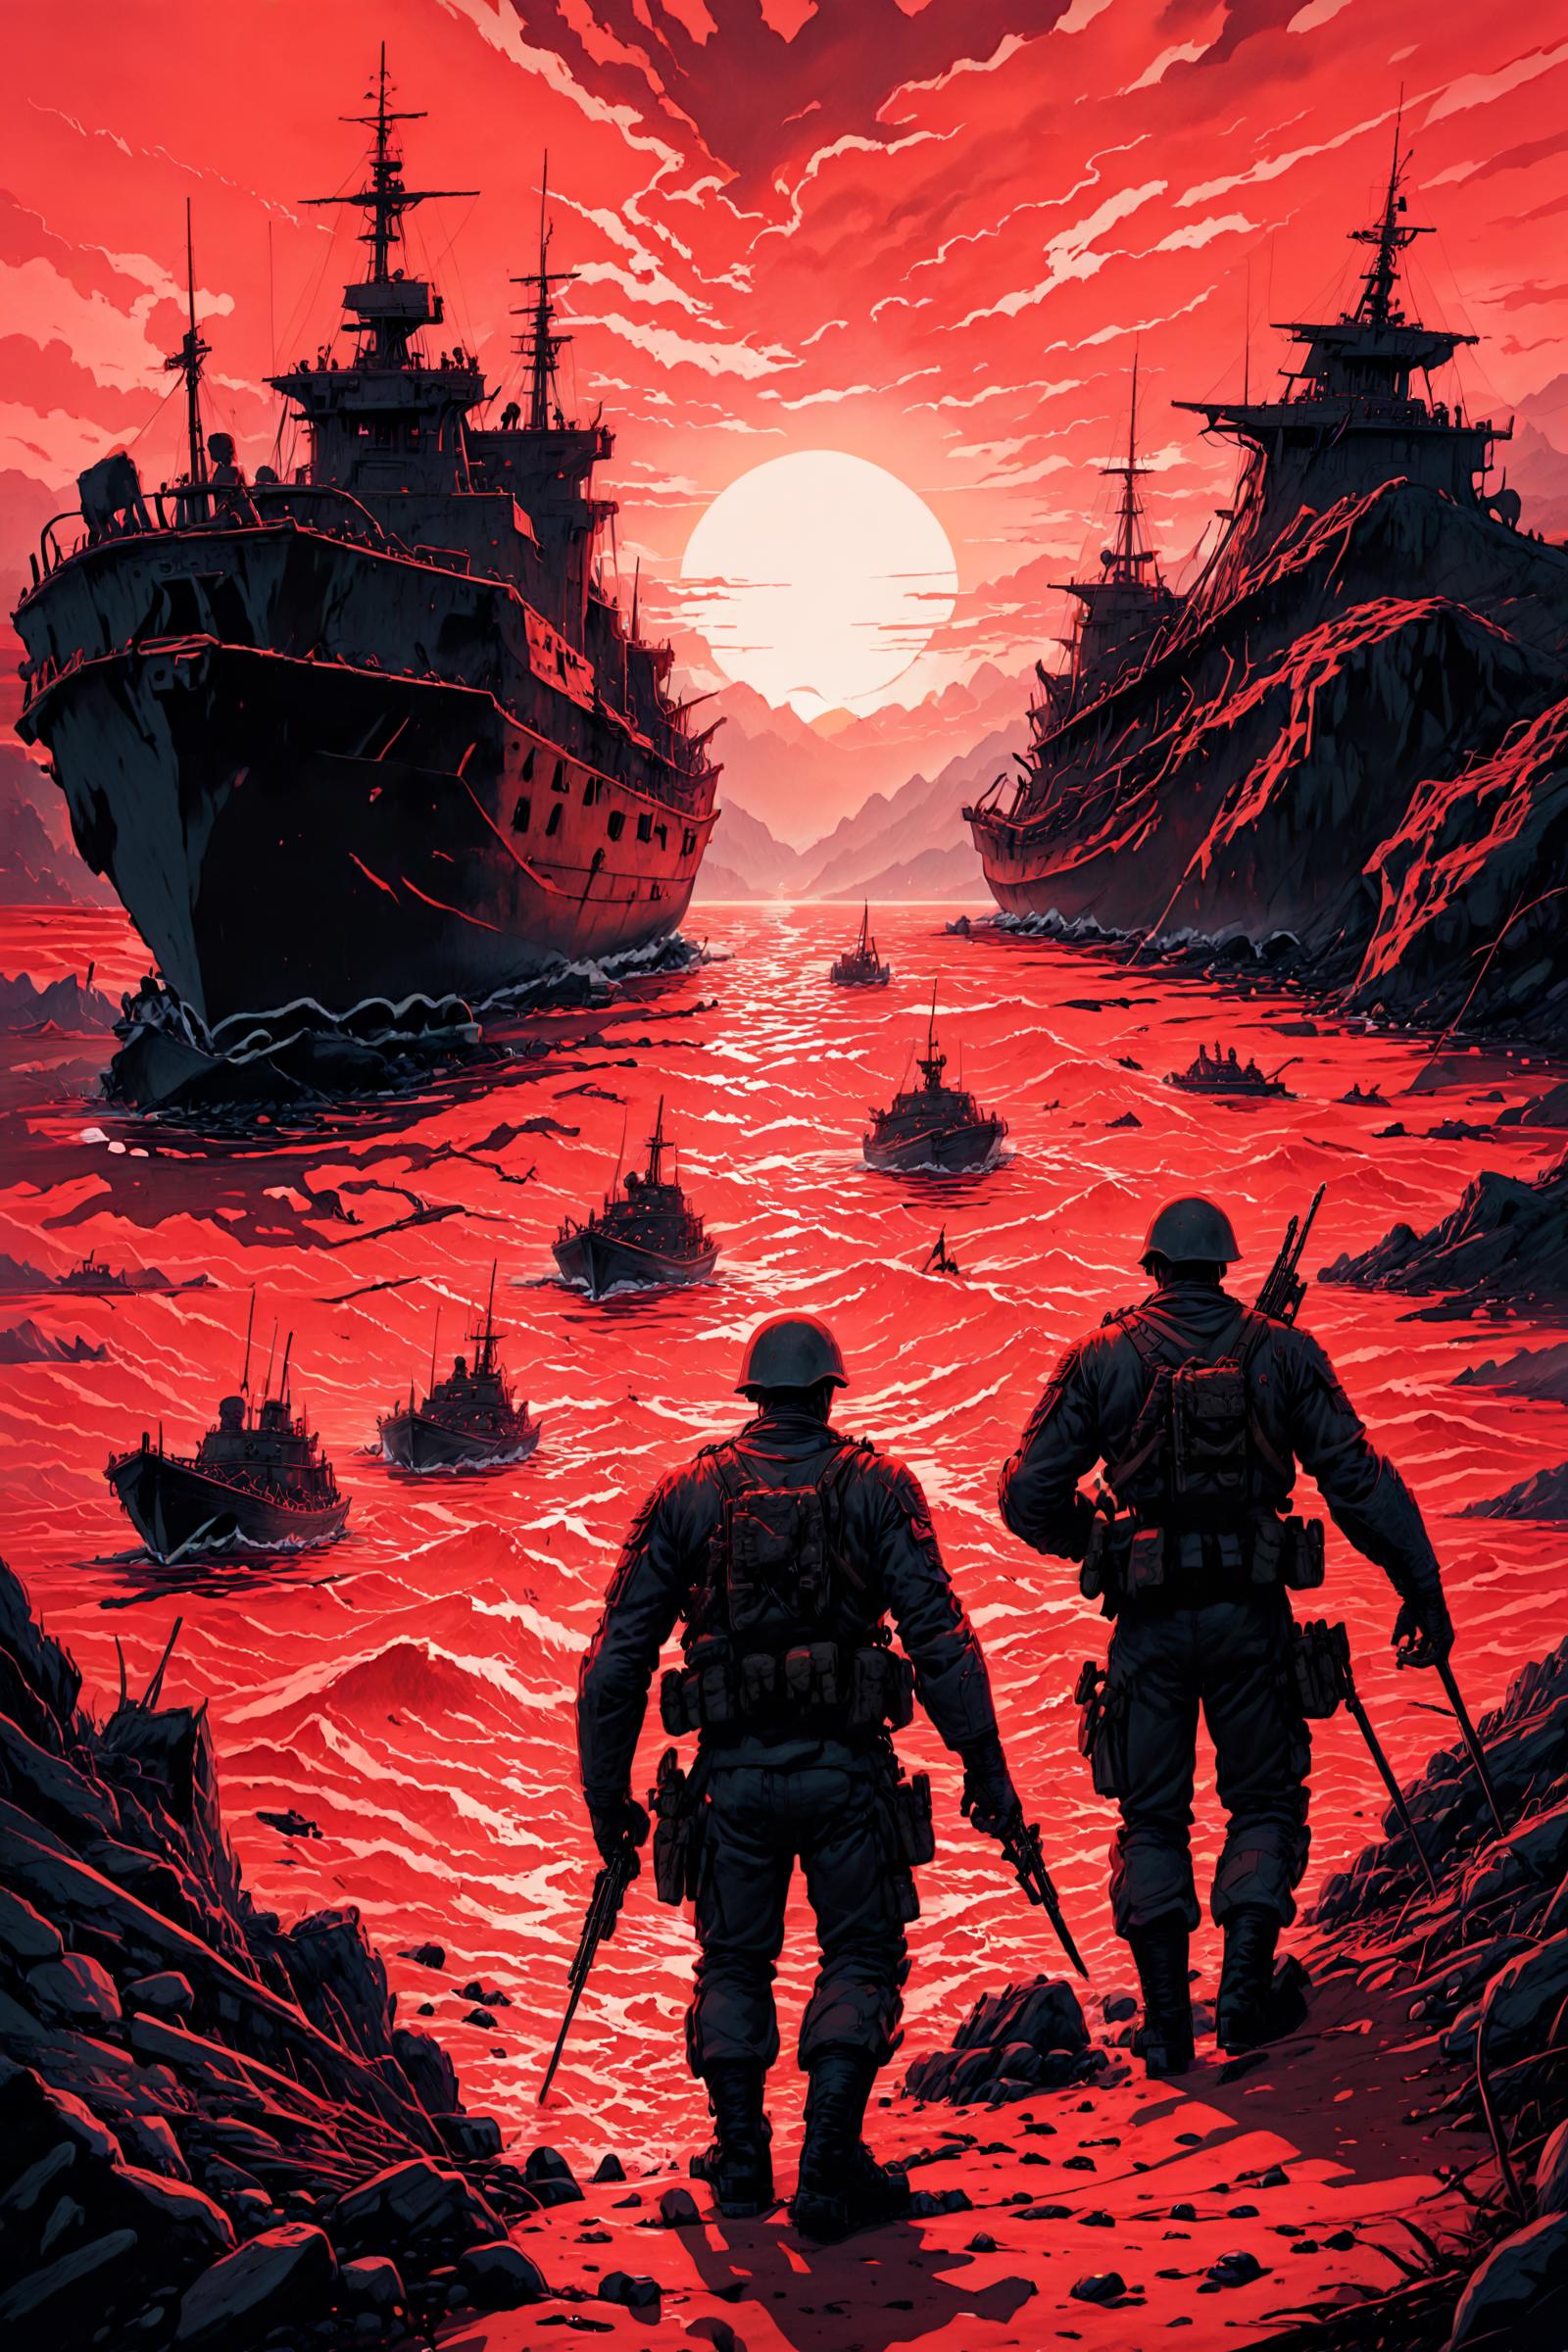 Two soldiers walking towards a massive warship at sunset.